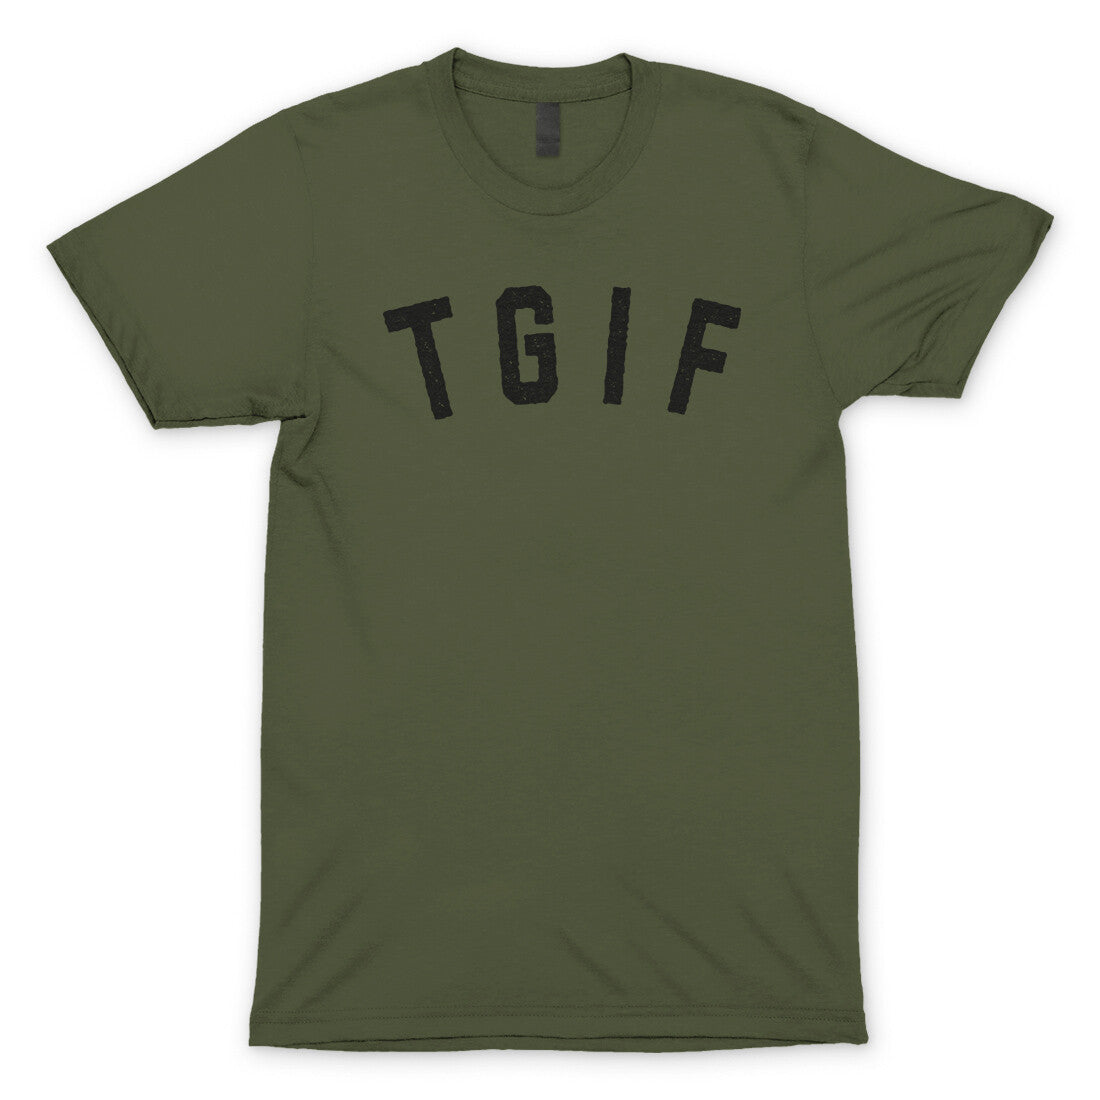 TGIF in Military Green Color